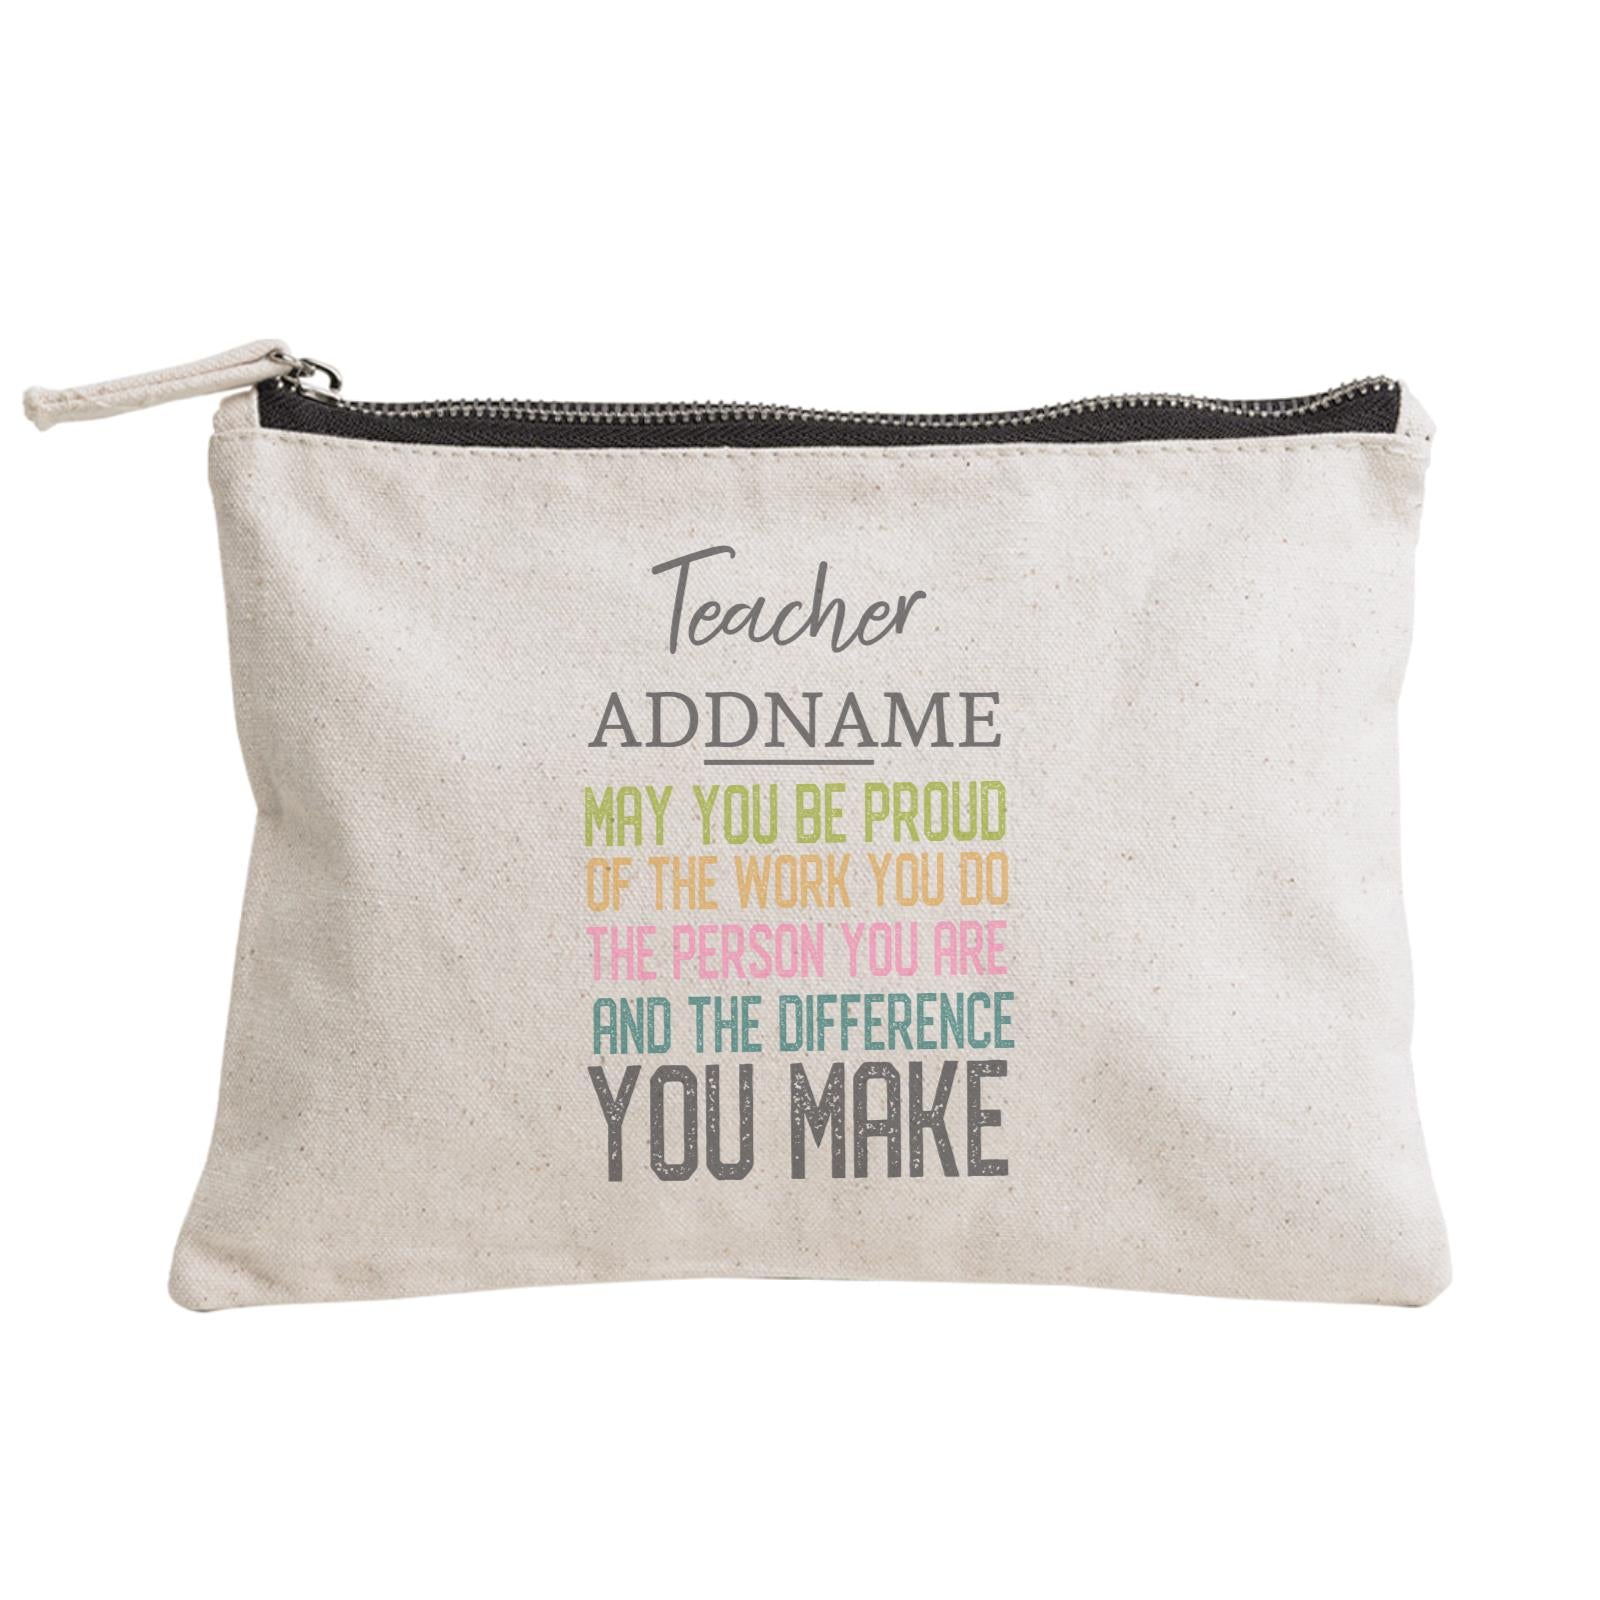 Teacher Addname May You Be Proud And Difference You Make Zipper Pouch